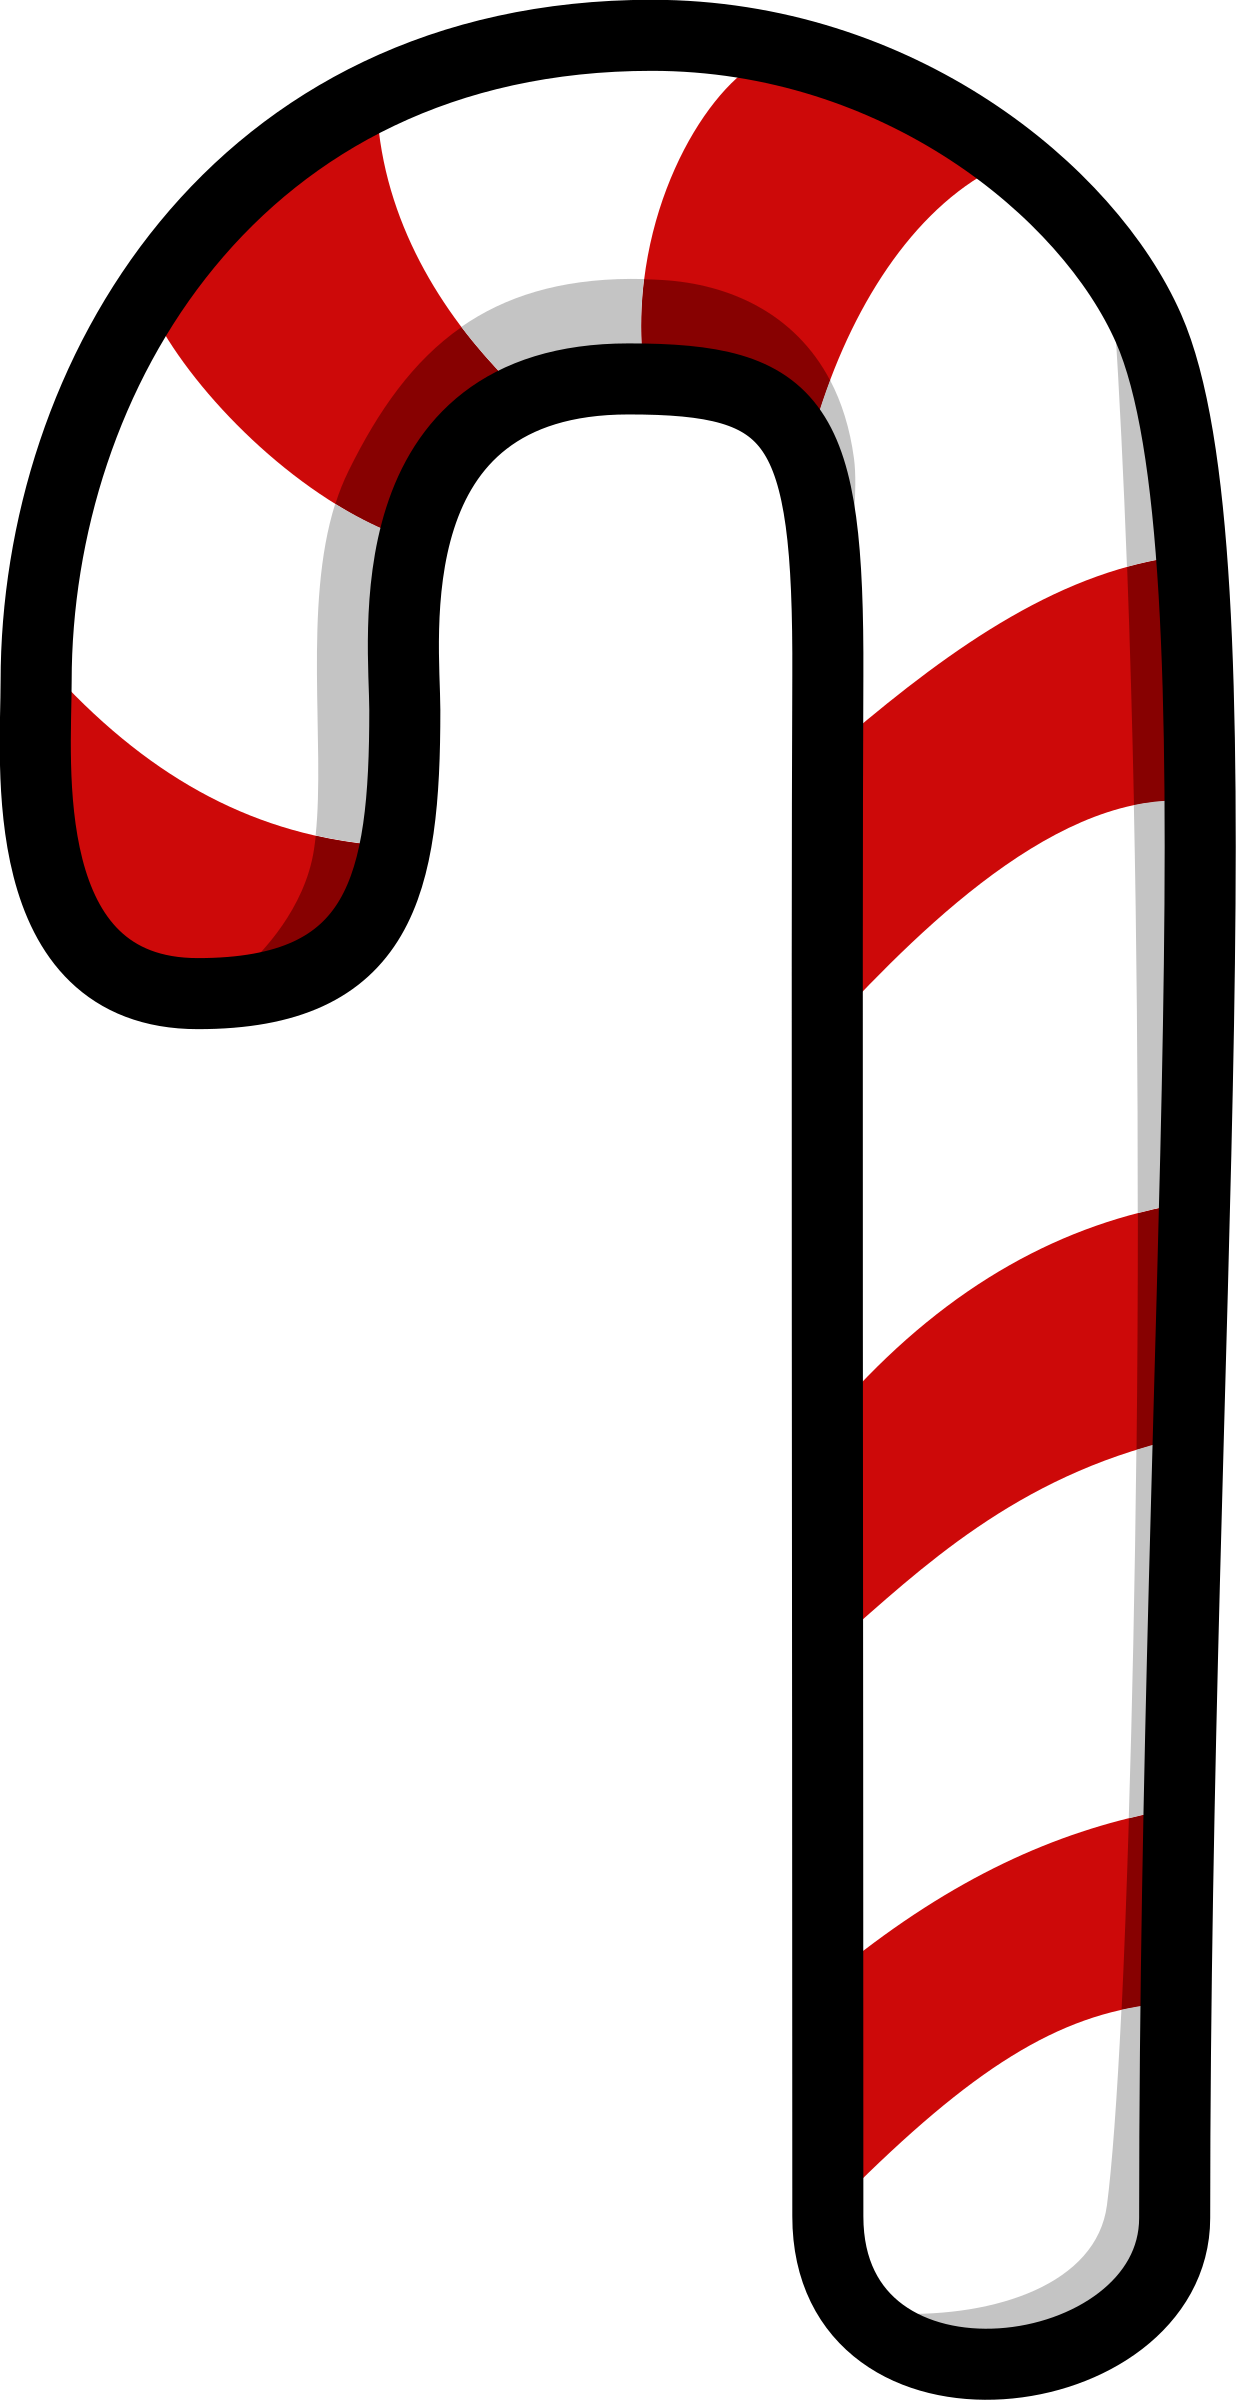 Candy Cane Clipart and .